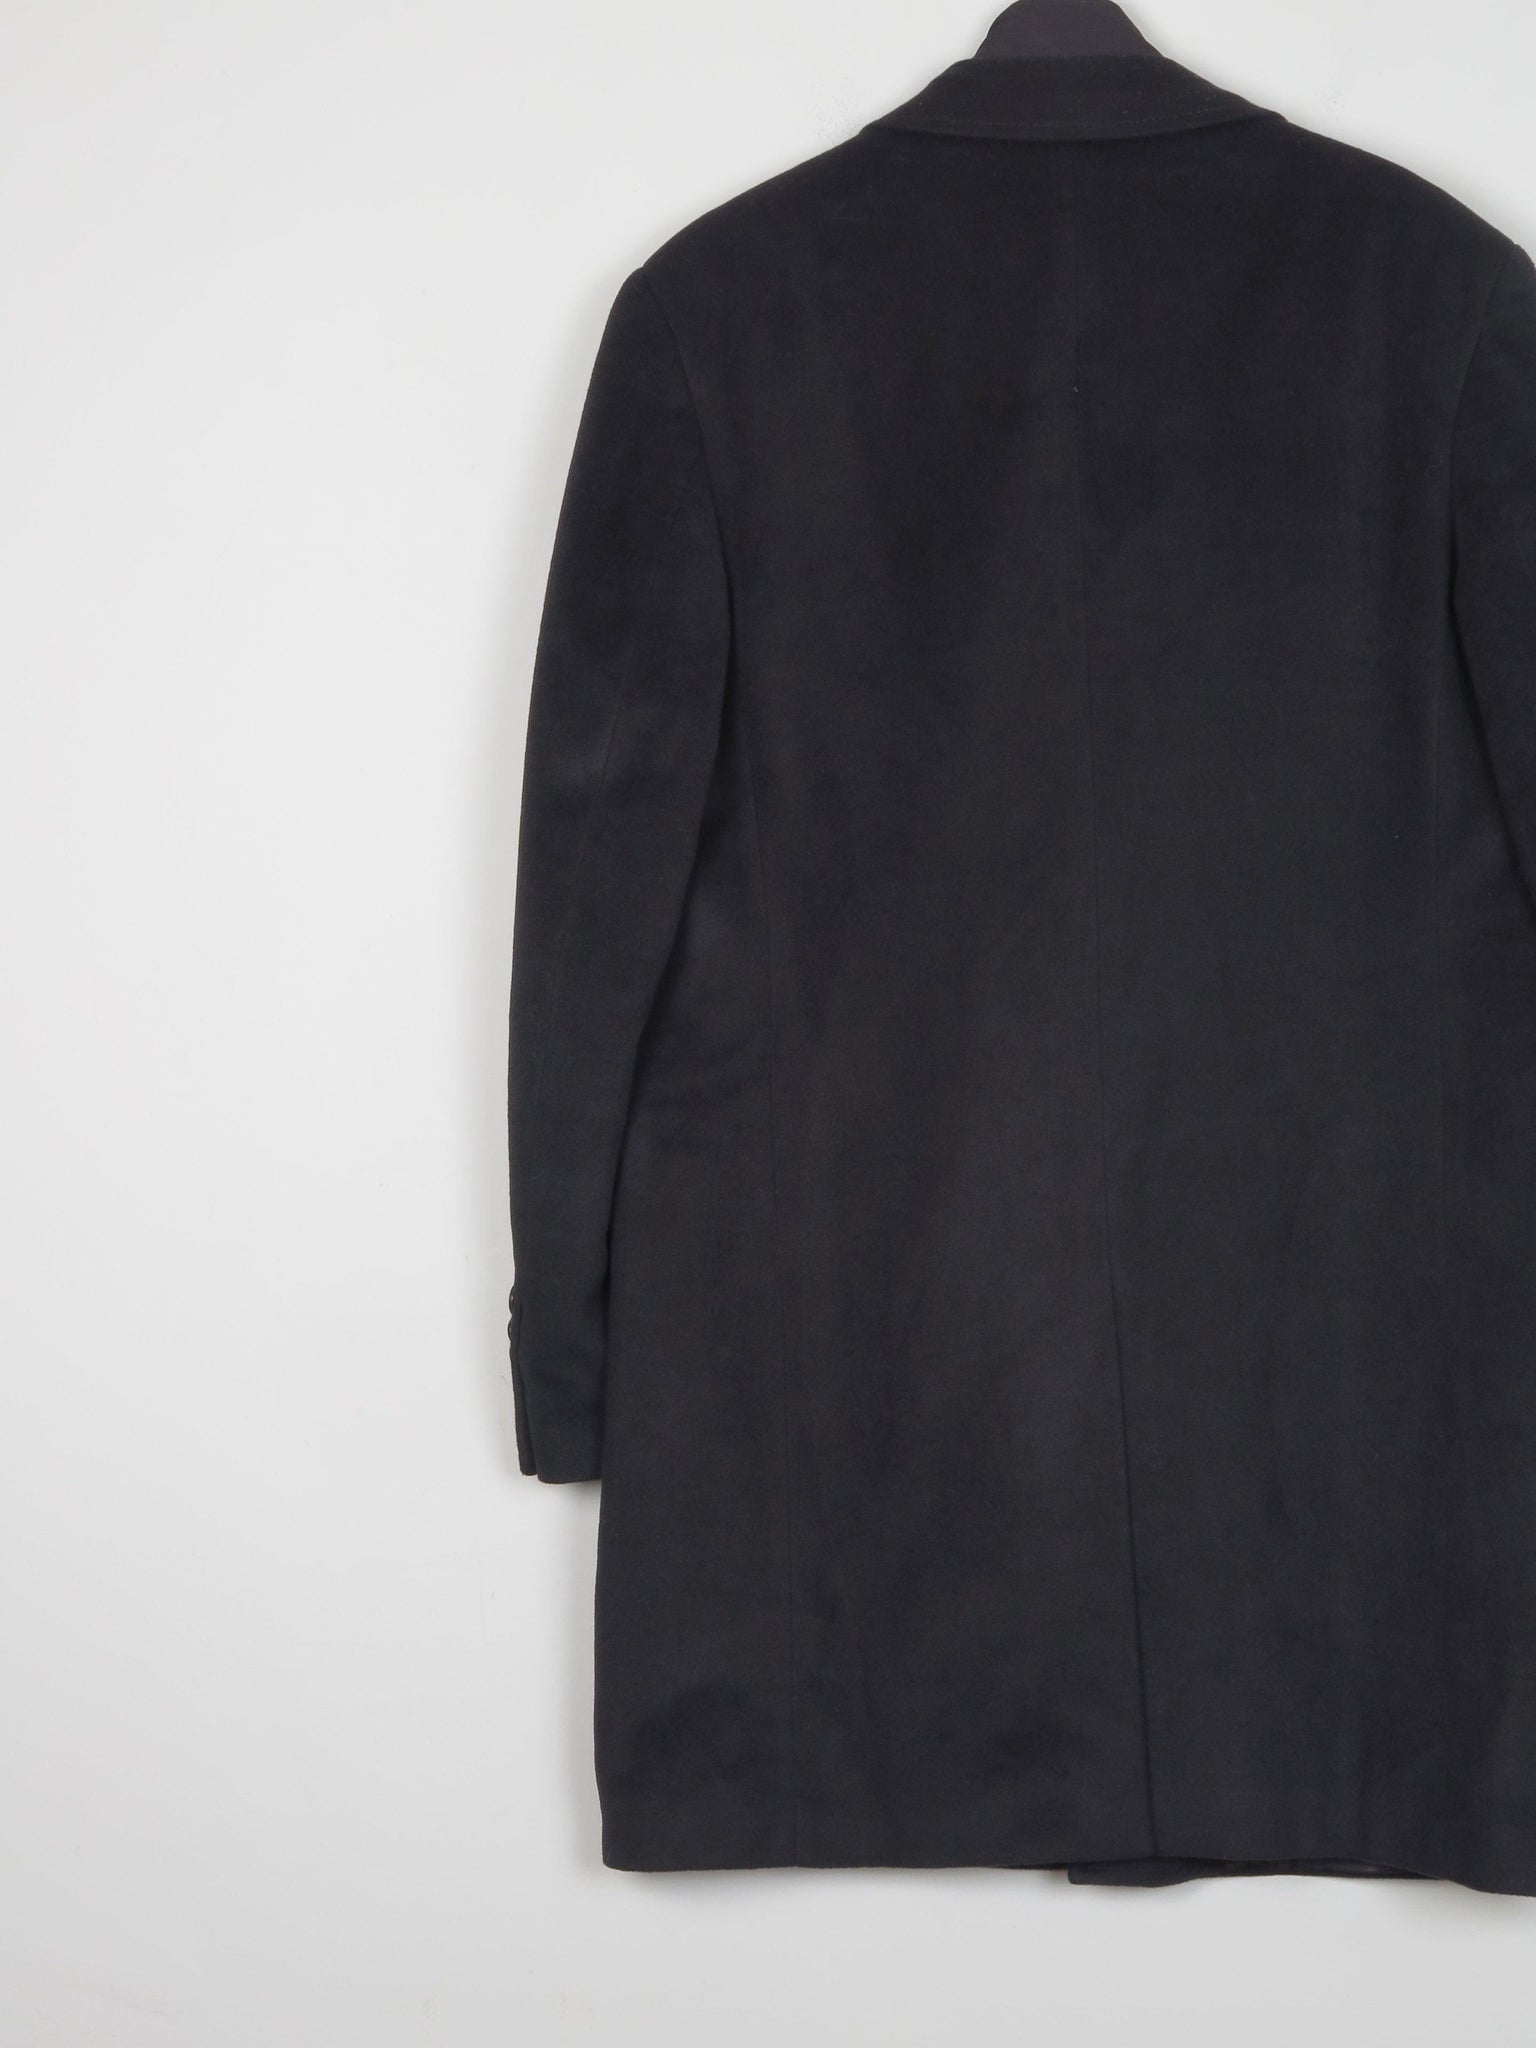 Mens Cashmere & Wool Black 3/4 length Crombie Style Coat 40" - The Harlequin